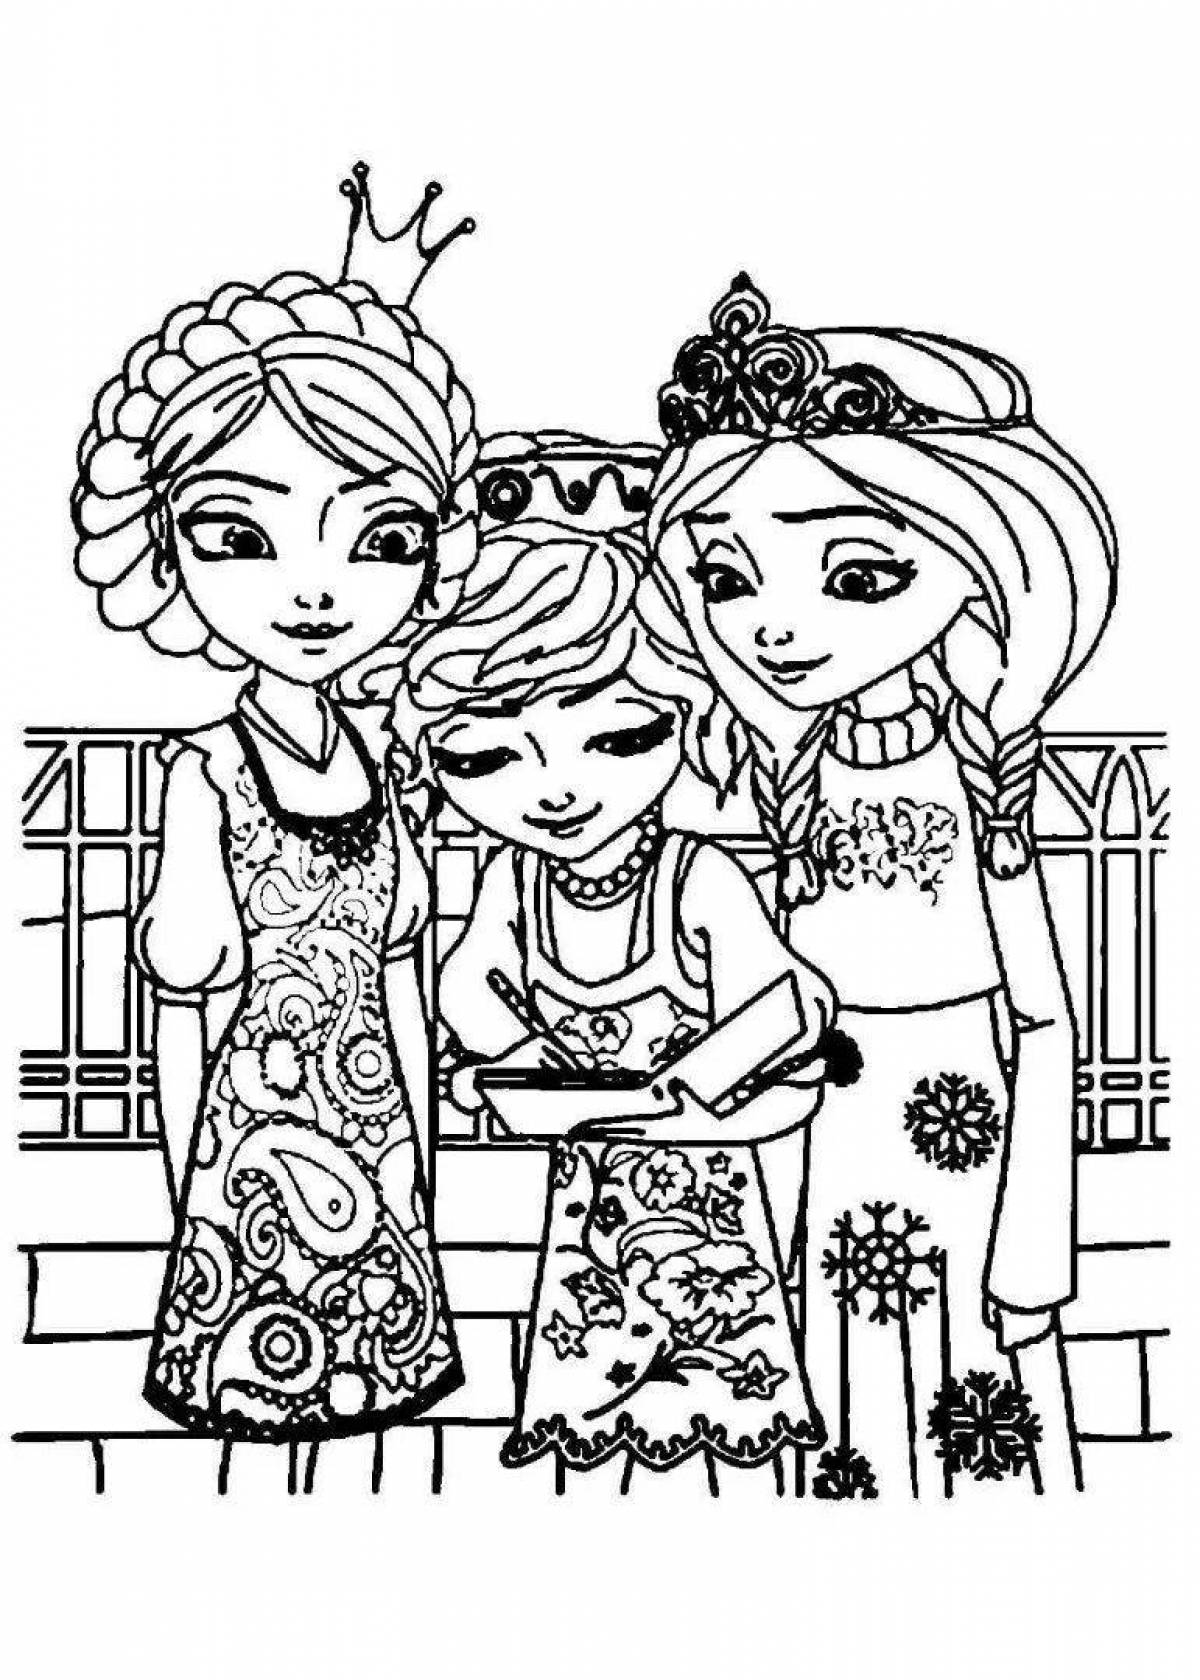 Coloring page for girls